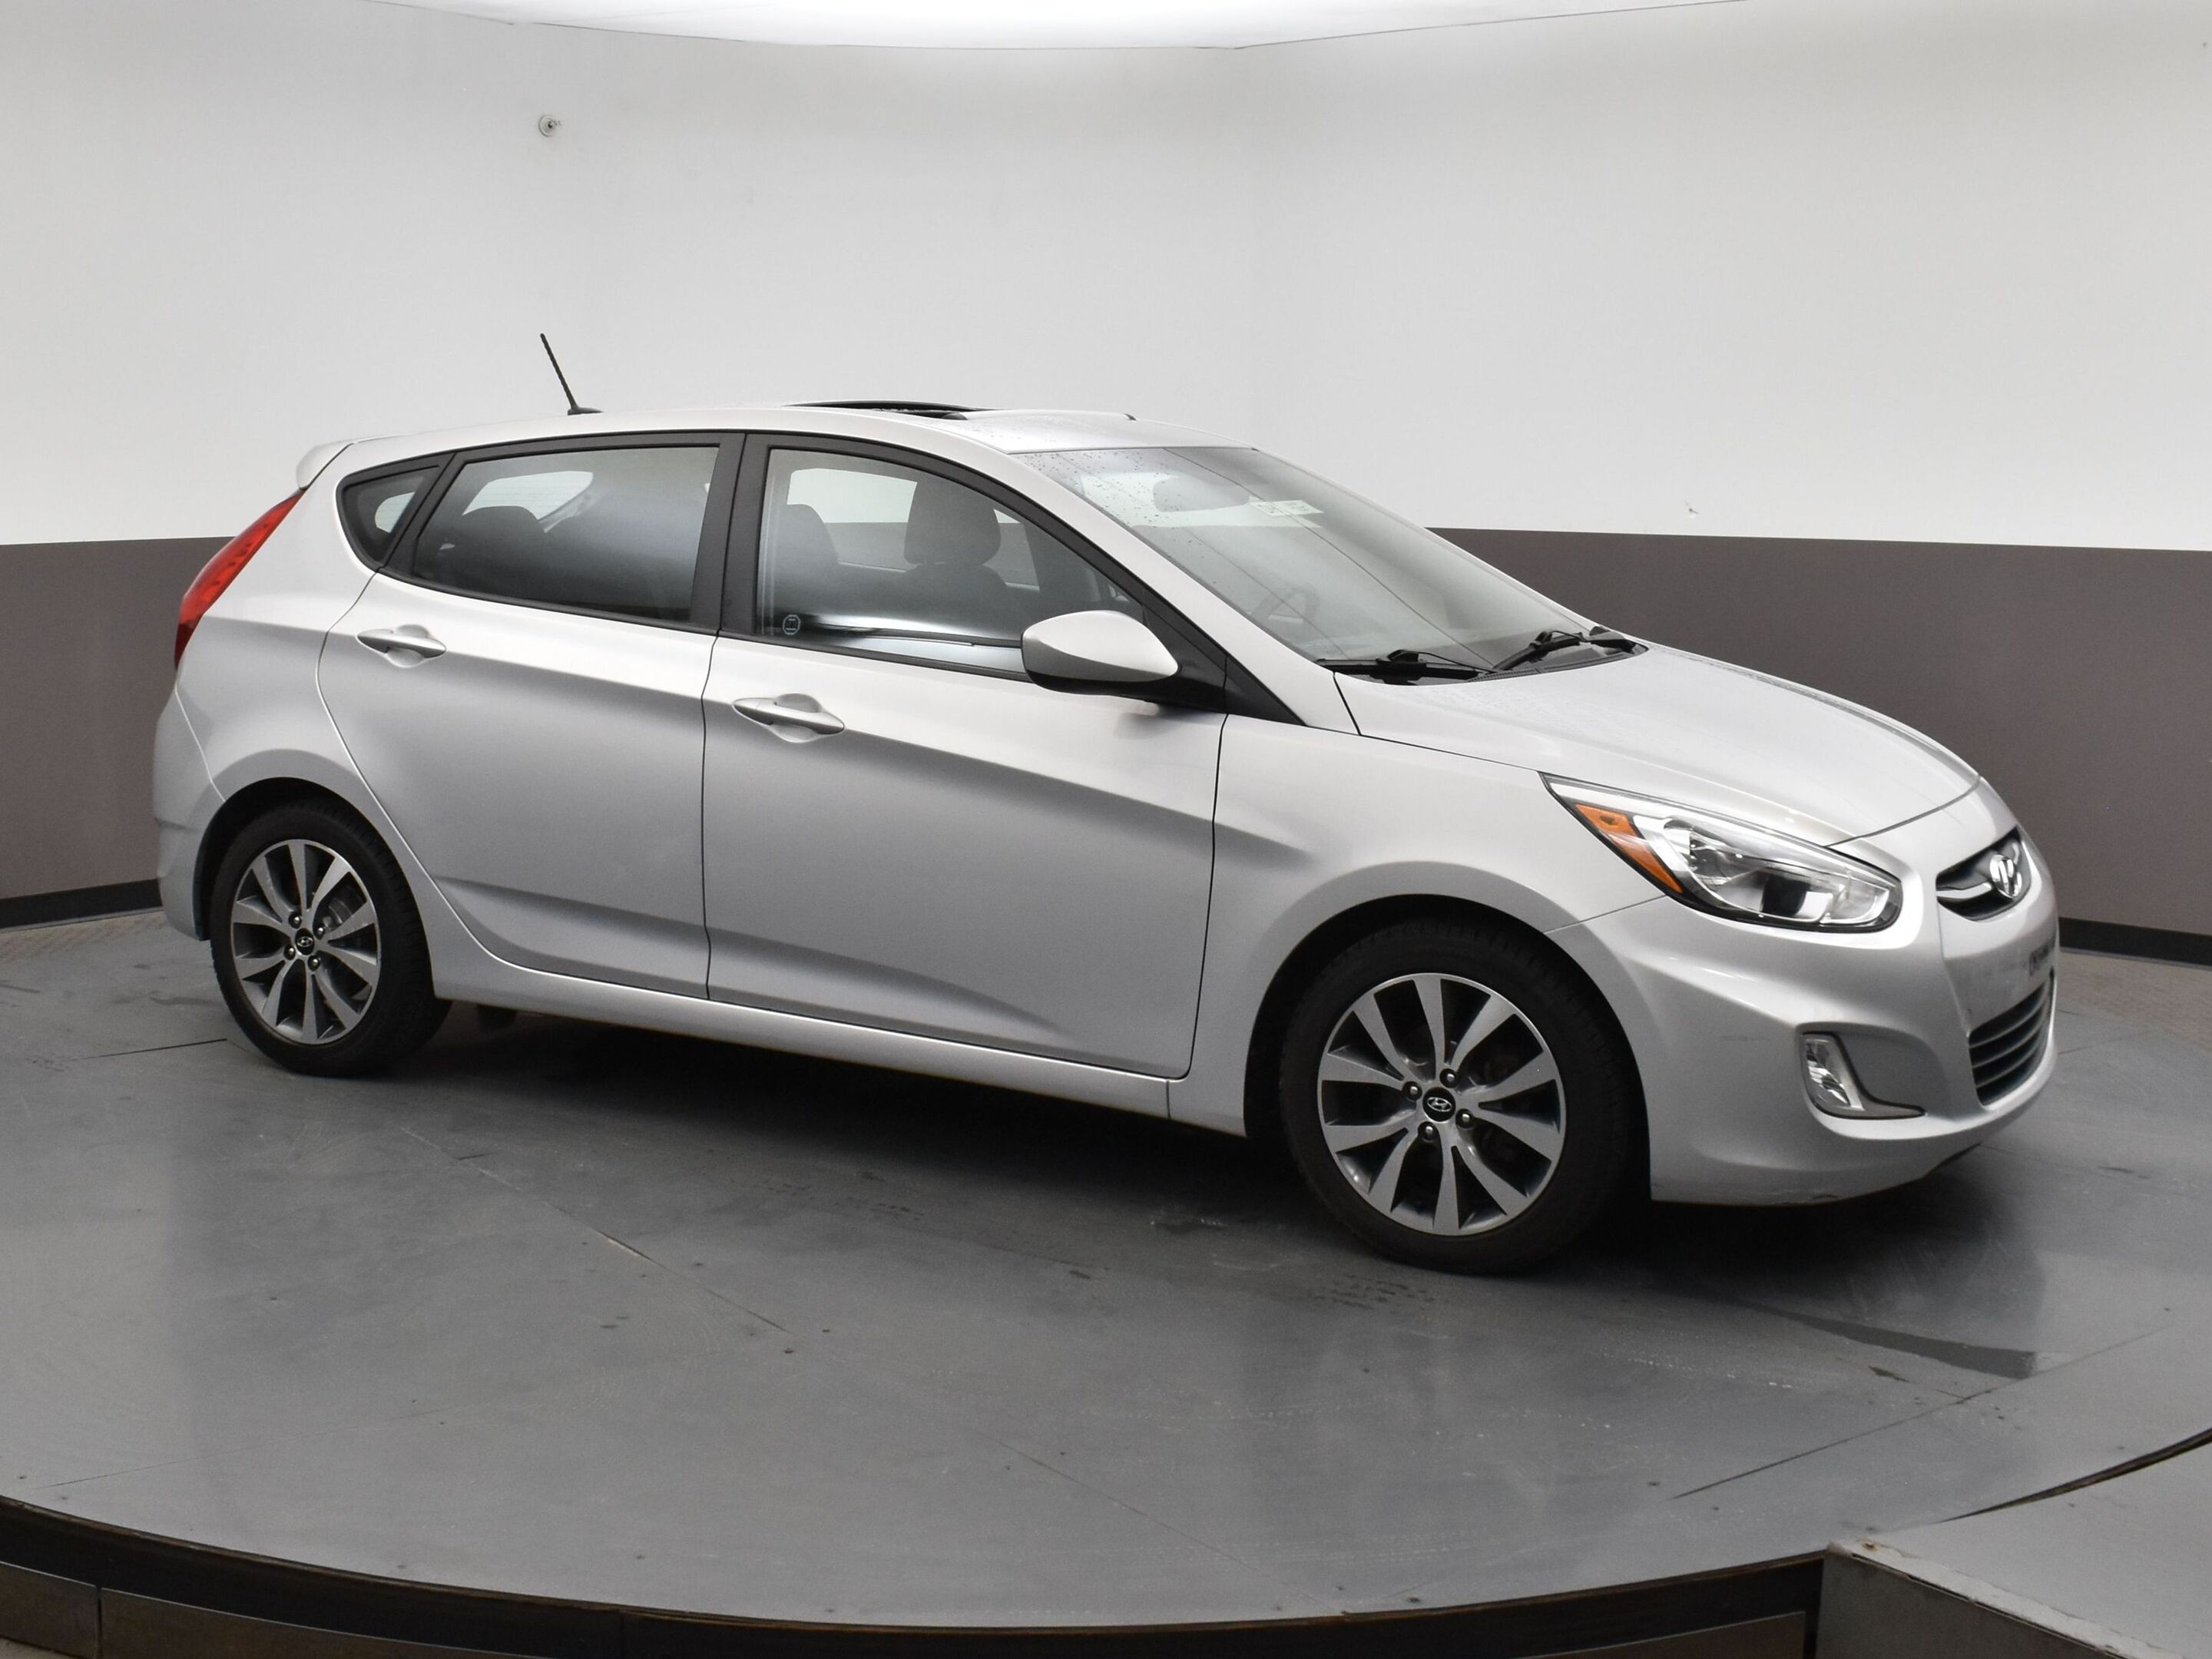 2017 Hyundai Accent SE Hatch & Fully Certified Sunroof, Alloys, heated